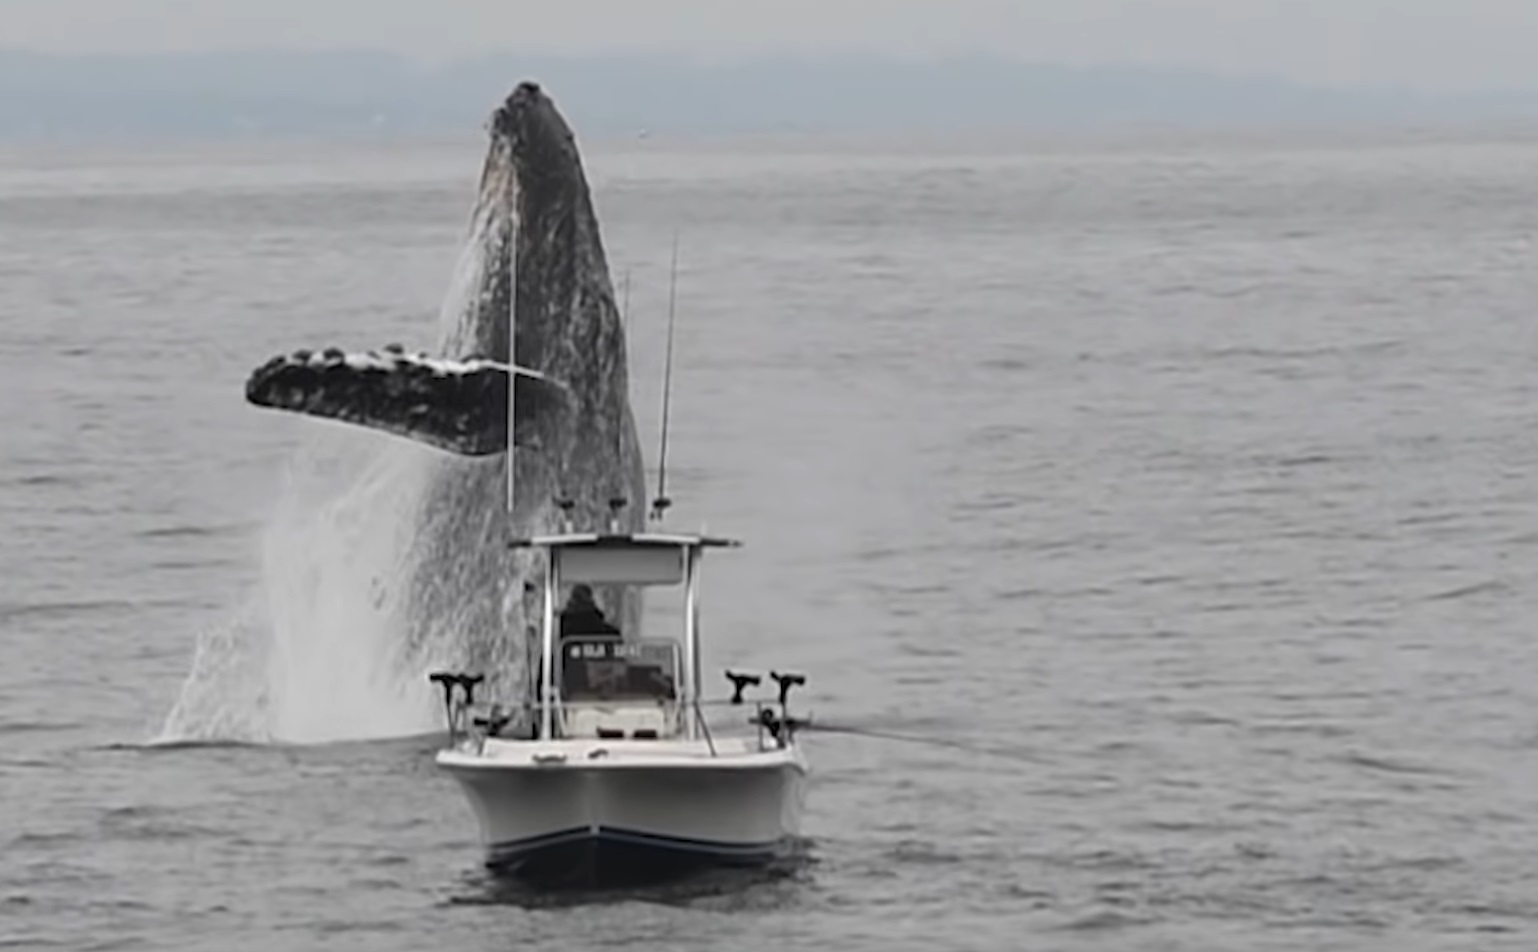 Whale Breach Really Close To Boat